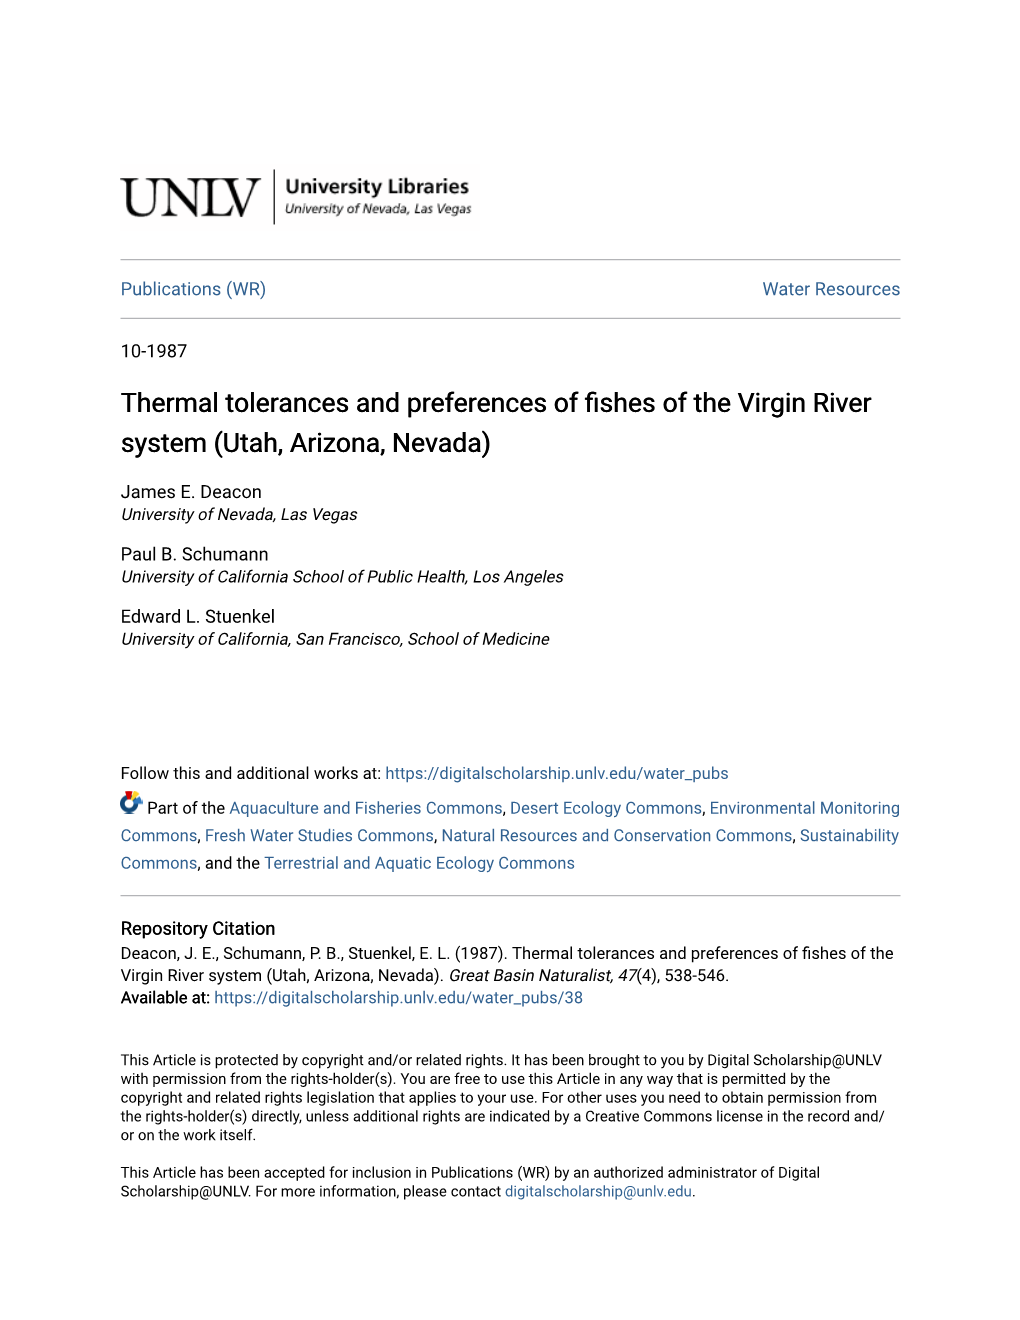 Thermal Tolerances and Preferences of Fishes of the Virgin River System (Utah, Arizona, Nevada)